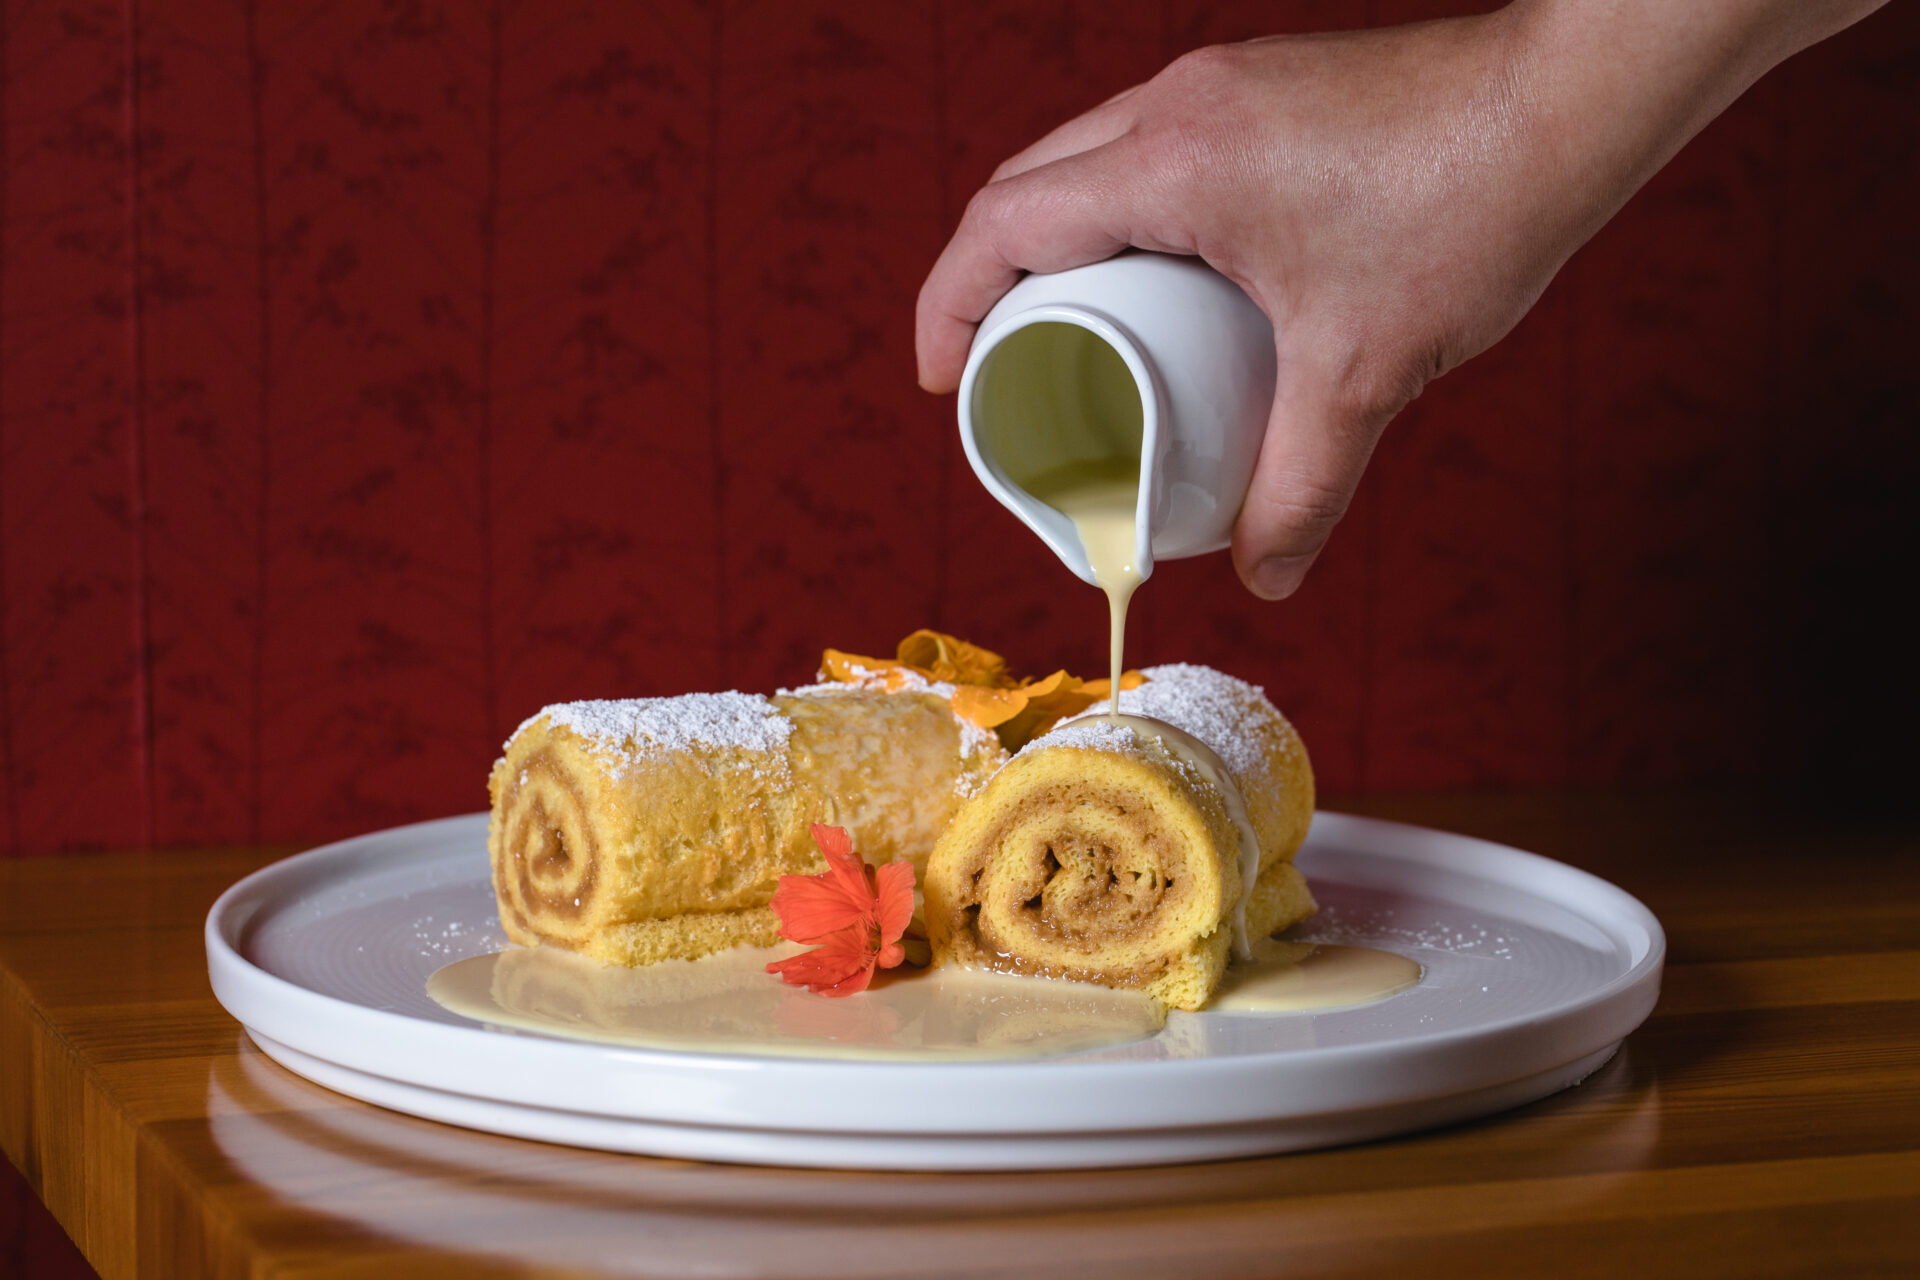 Brazo Gitano, or a Venezuelan swiss roll, one of the holiday baking projects from Claudia Martinez of Miller Union